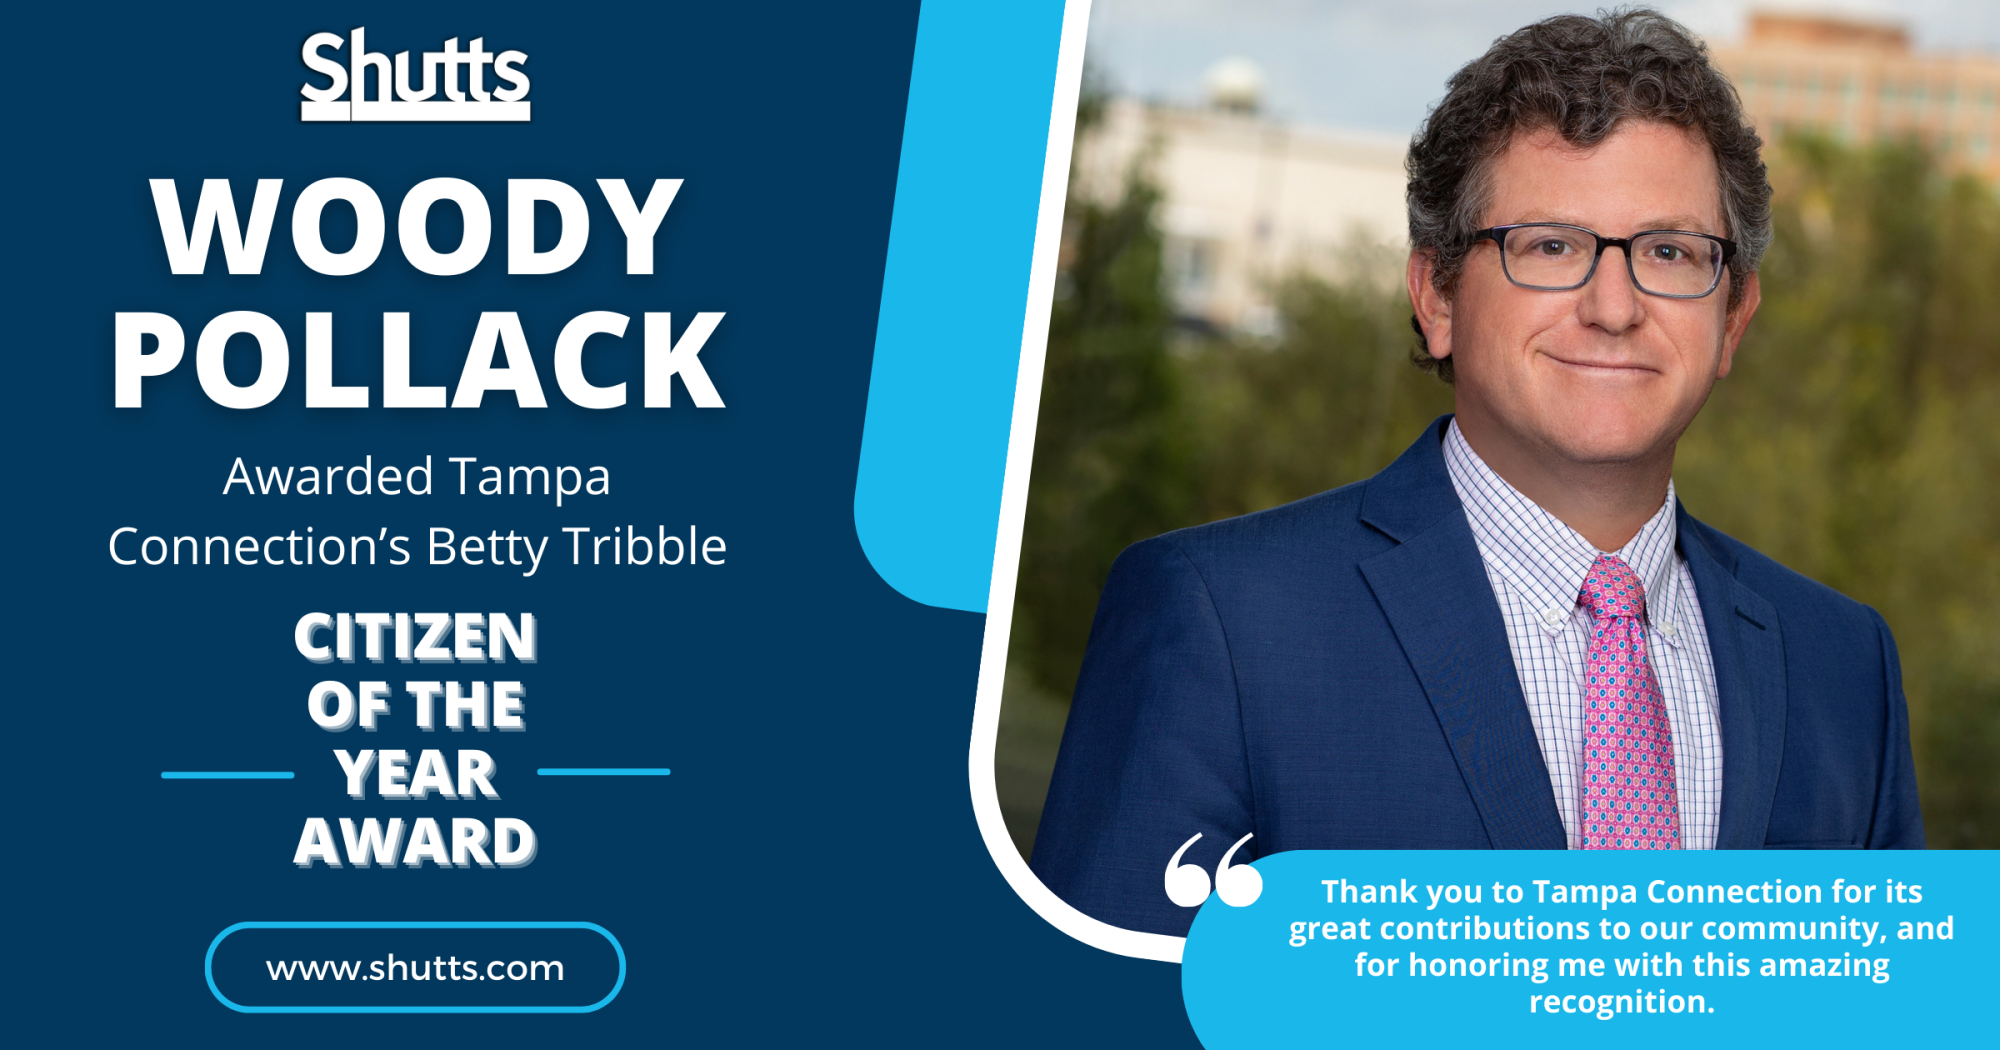 Woody Pollack Awarded Tampa Connection’s Betty Tribble Citizen of the Year Award